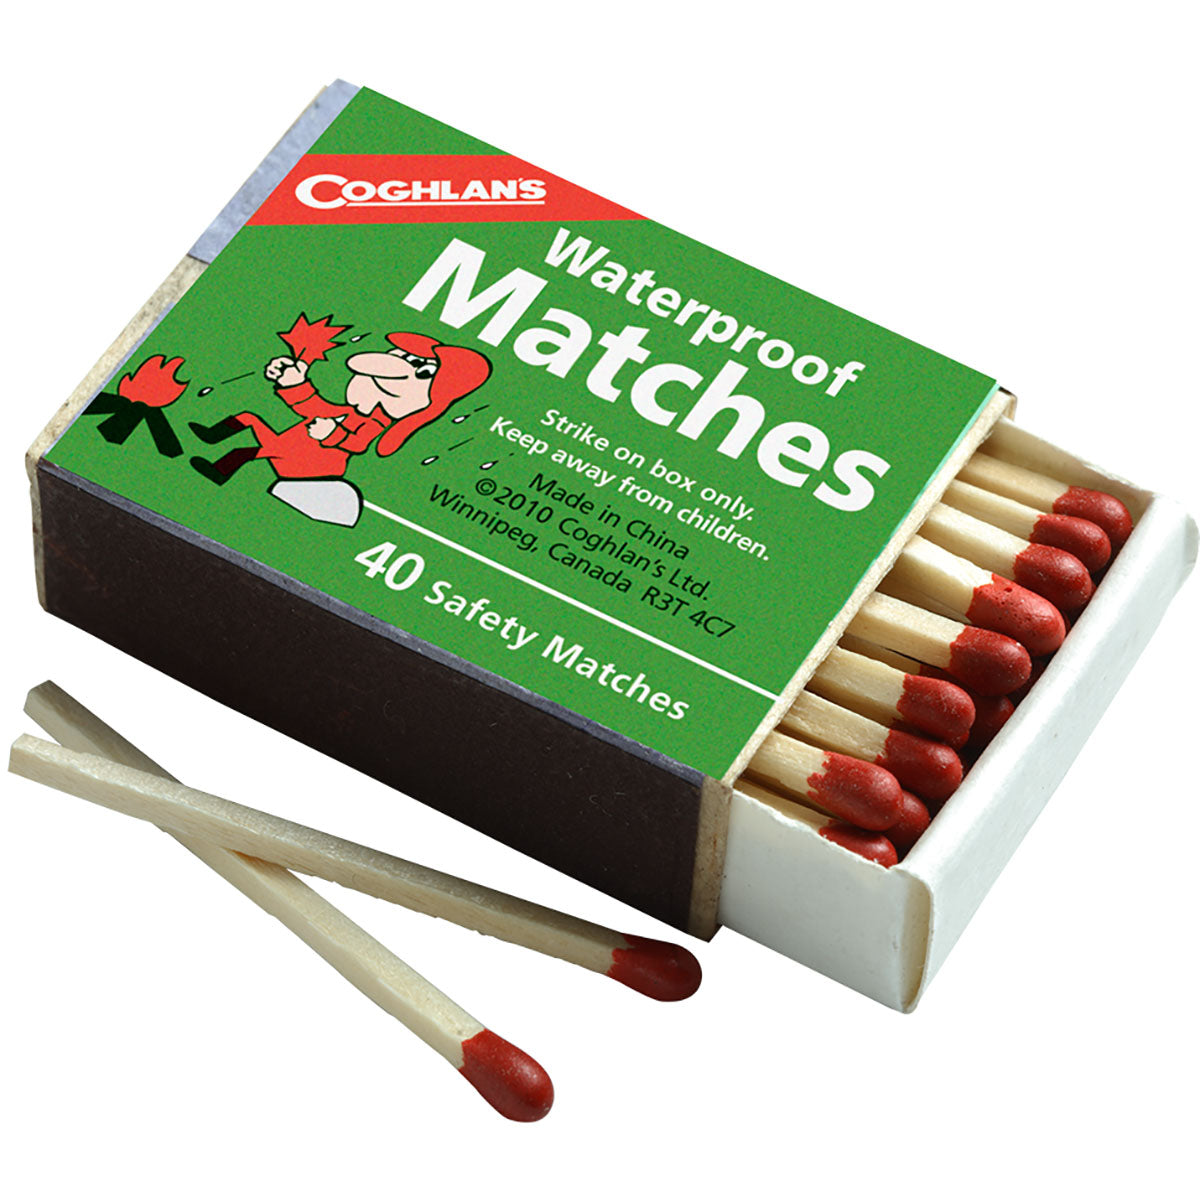 Coghlan's Waterproof Matches, 4 Boxes (160 pcs), Emergency Safety Fire Starter Coghlan's